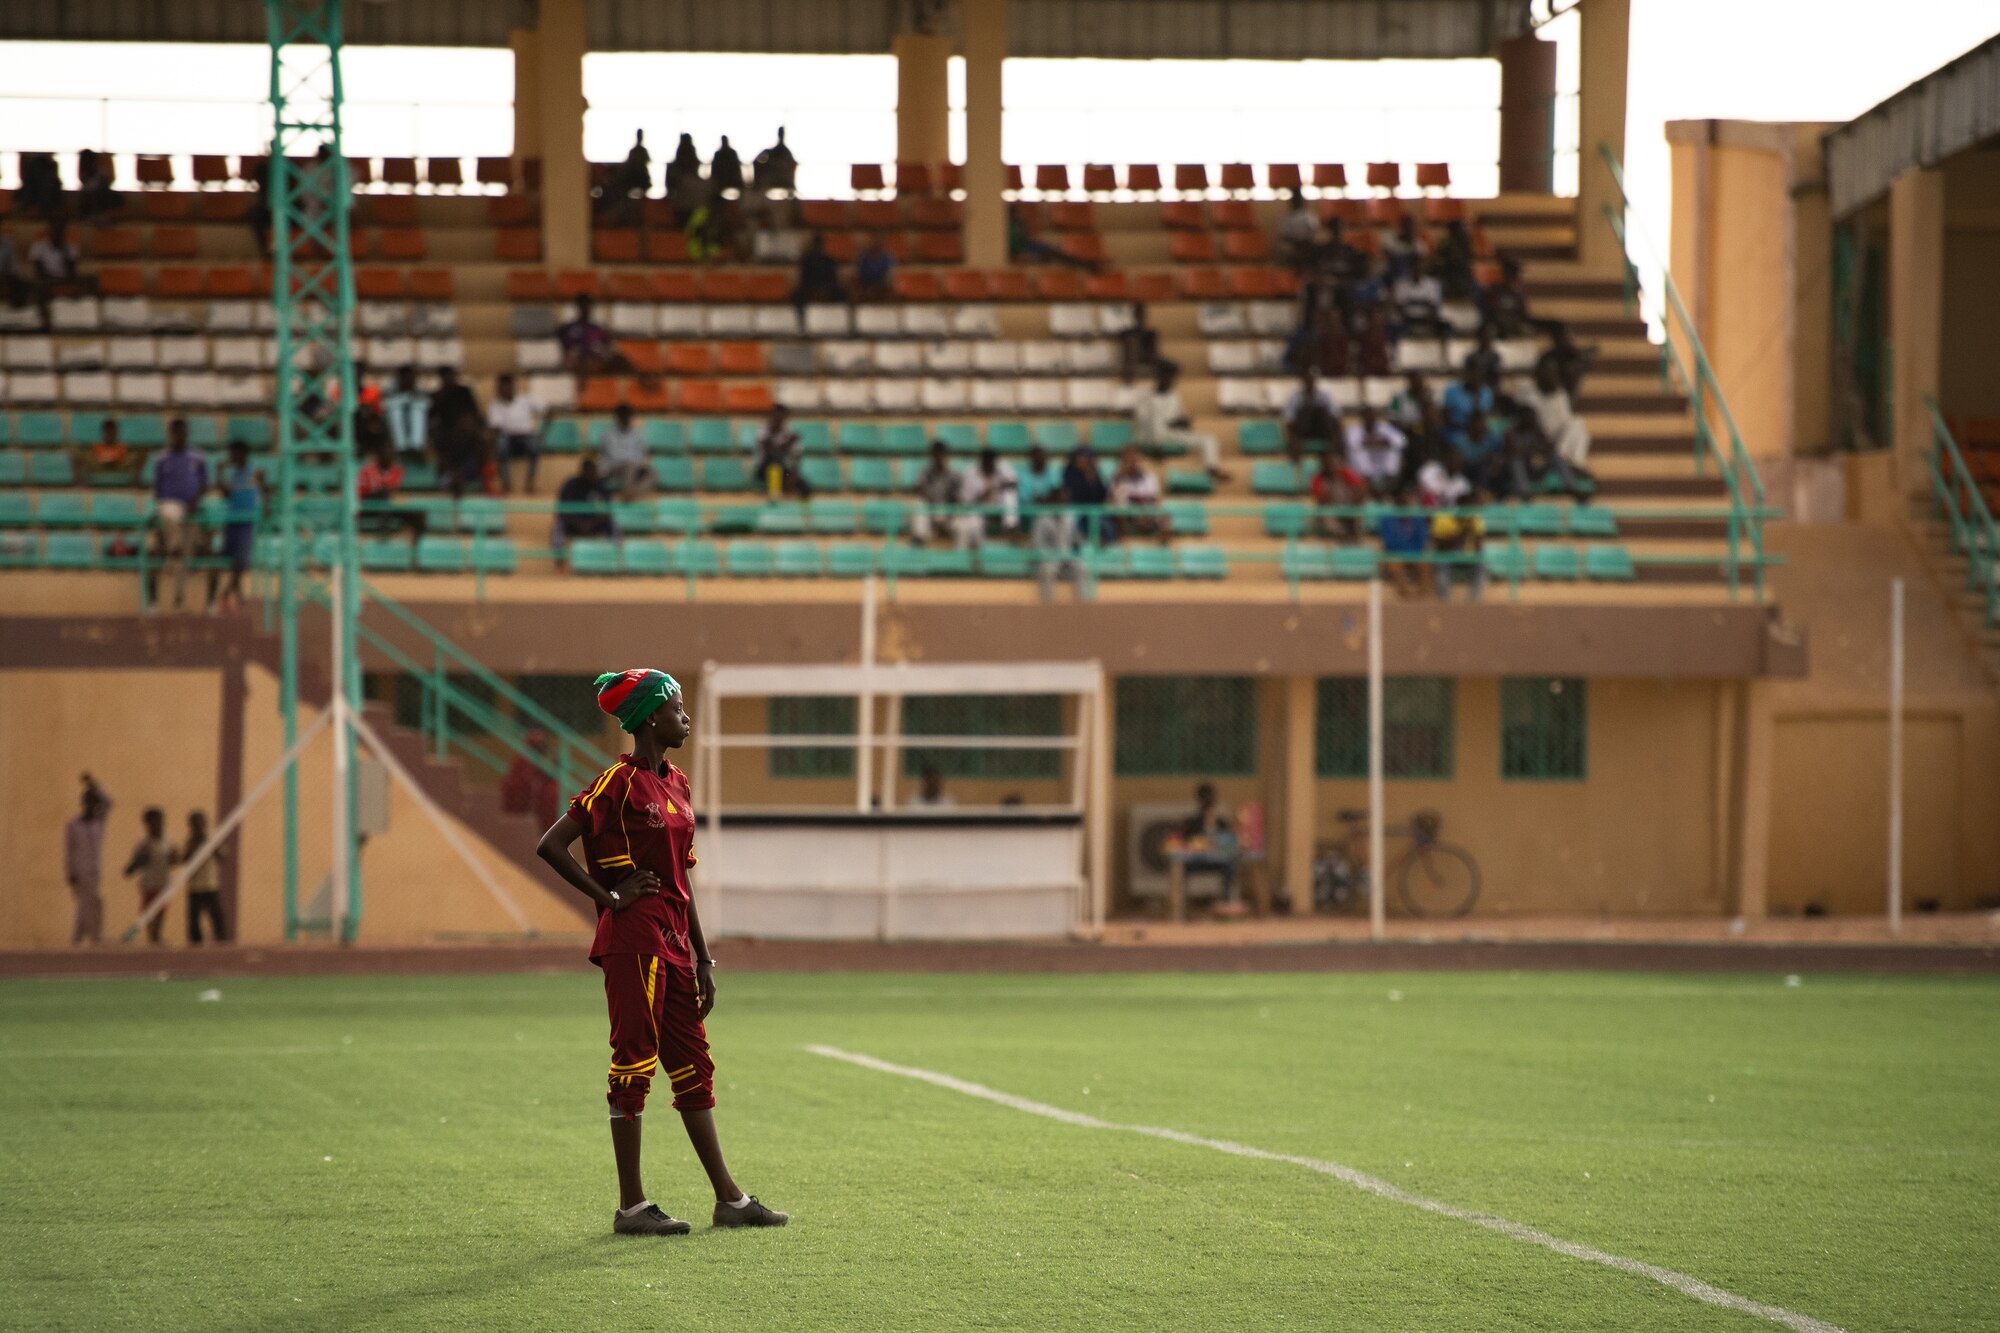 The goalie for the Nassara Athletic Club Women’s Soccer Team observes the opposite side of the field during a recreational game between Nigerien Air Base 201 and the Nassara Athletic Club Women’s Soccer Team at the Agadez Sports Stadium in Agadez, Niger, July 5, 2019. The civil affairs team held the game to build rapport and promote positive sentiment between the local community and AB 201 personnel. (U.S. Air Force photo by Staff Sgt. Devin Boyer)